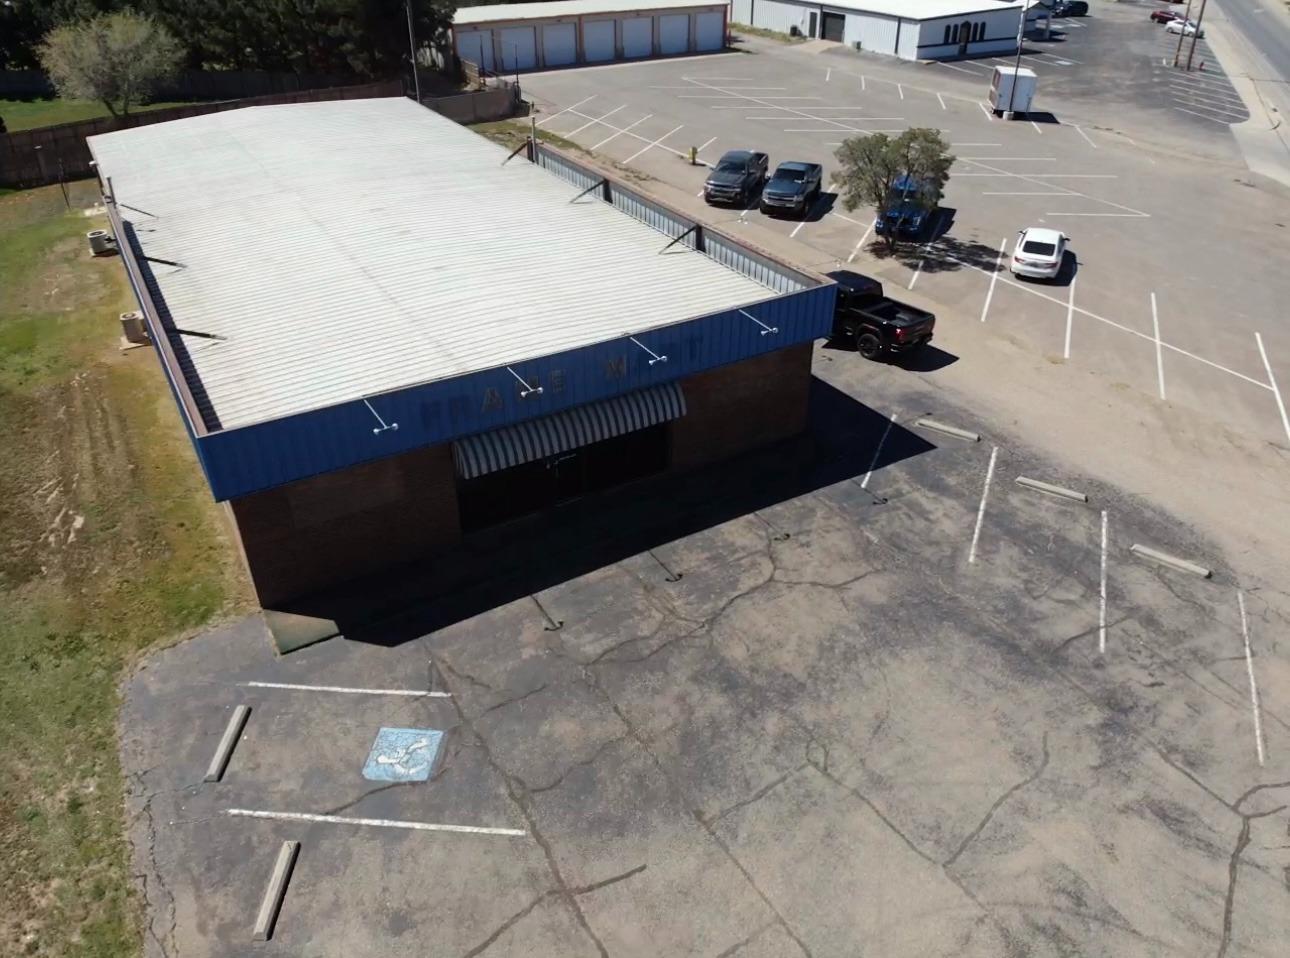 Don't miss your opportunity on this great commercial property ideally located on Marsha Sharp frontage road. You're sure to receive plenty of exposure with this perfect location with a high traffic area. Right down the street from 4ore, this 5500 sq ft building could be the perfect opportunity for your business. This commercial building has a beautiful showroom, along with plenty of work space and storage in the back of the building. Also includes its own well and septic, which will save you big time in the long run!